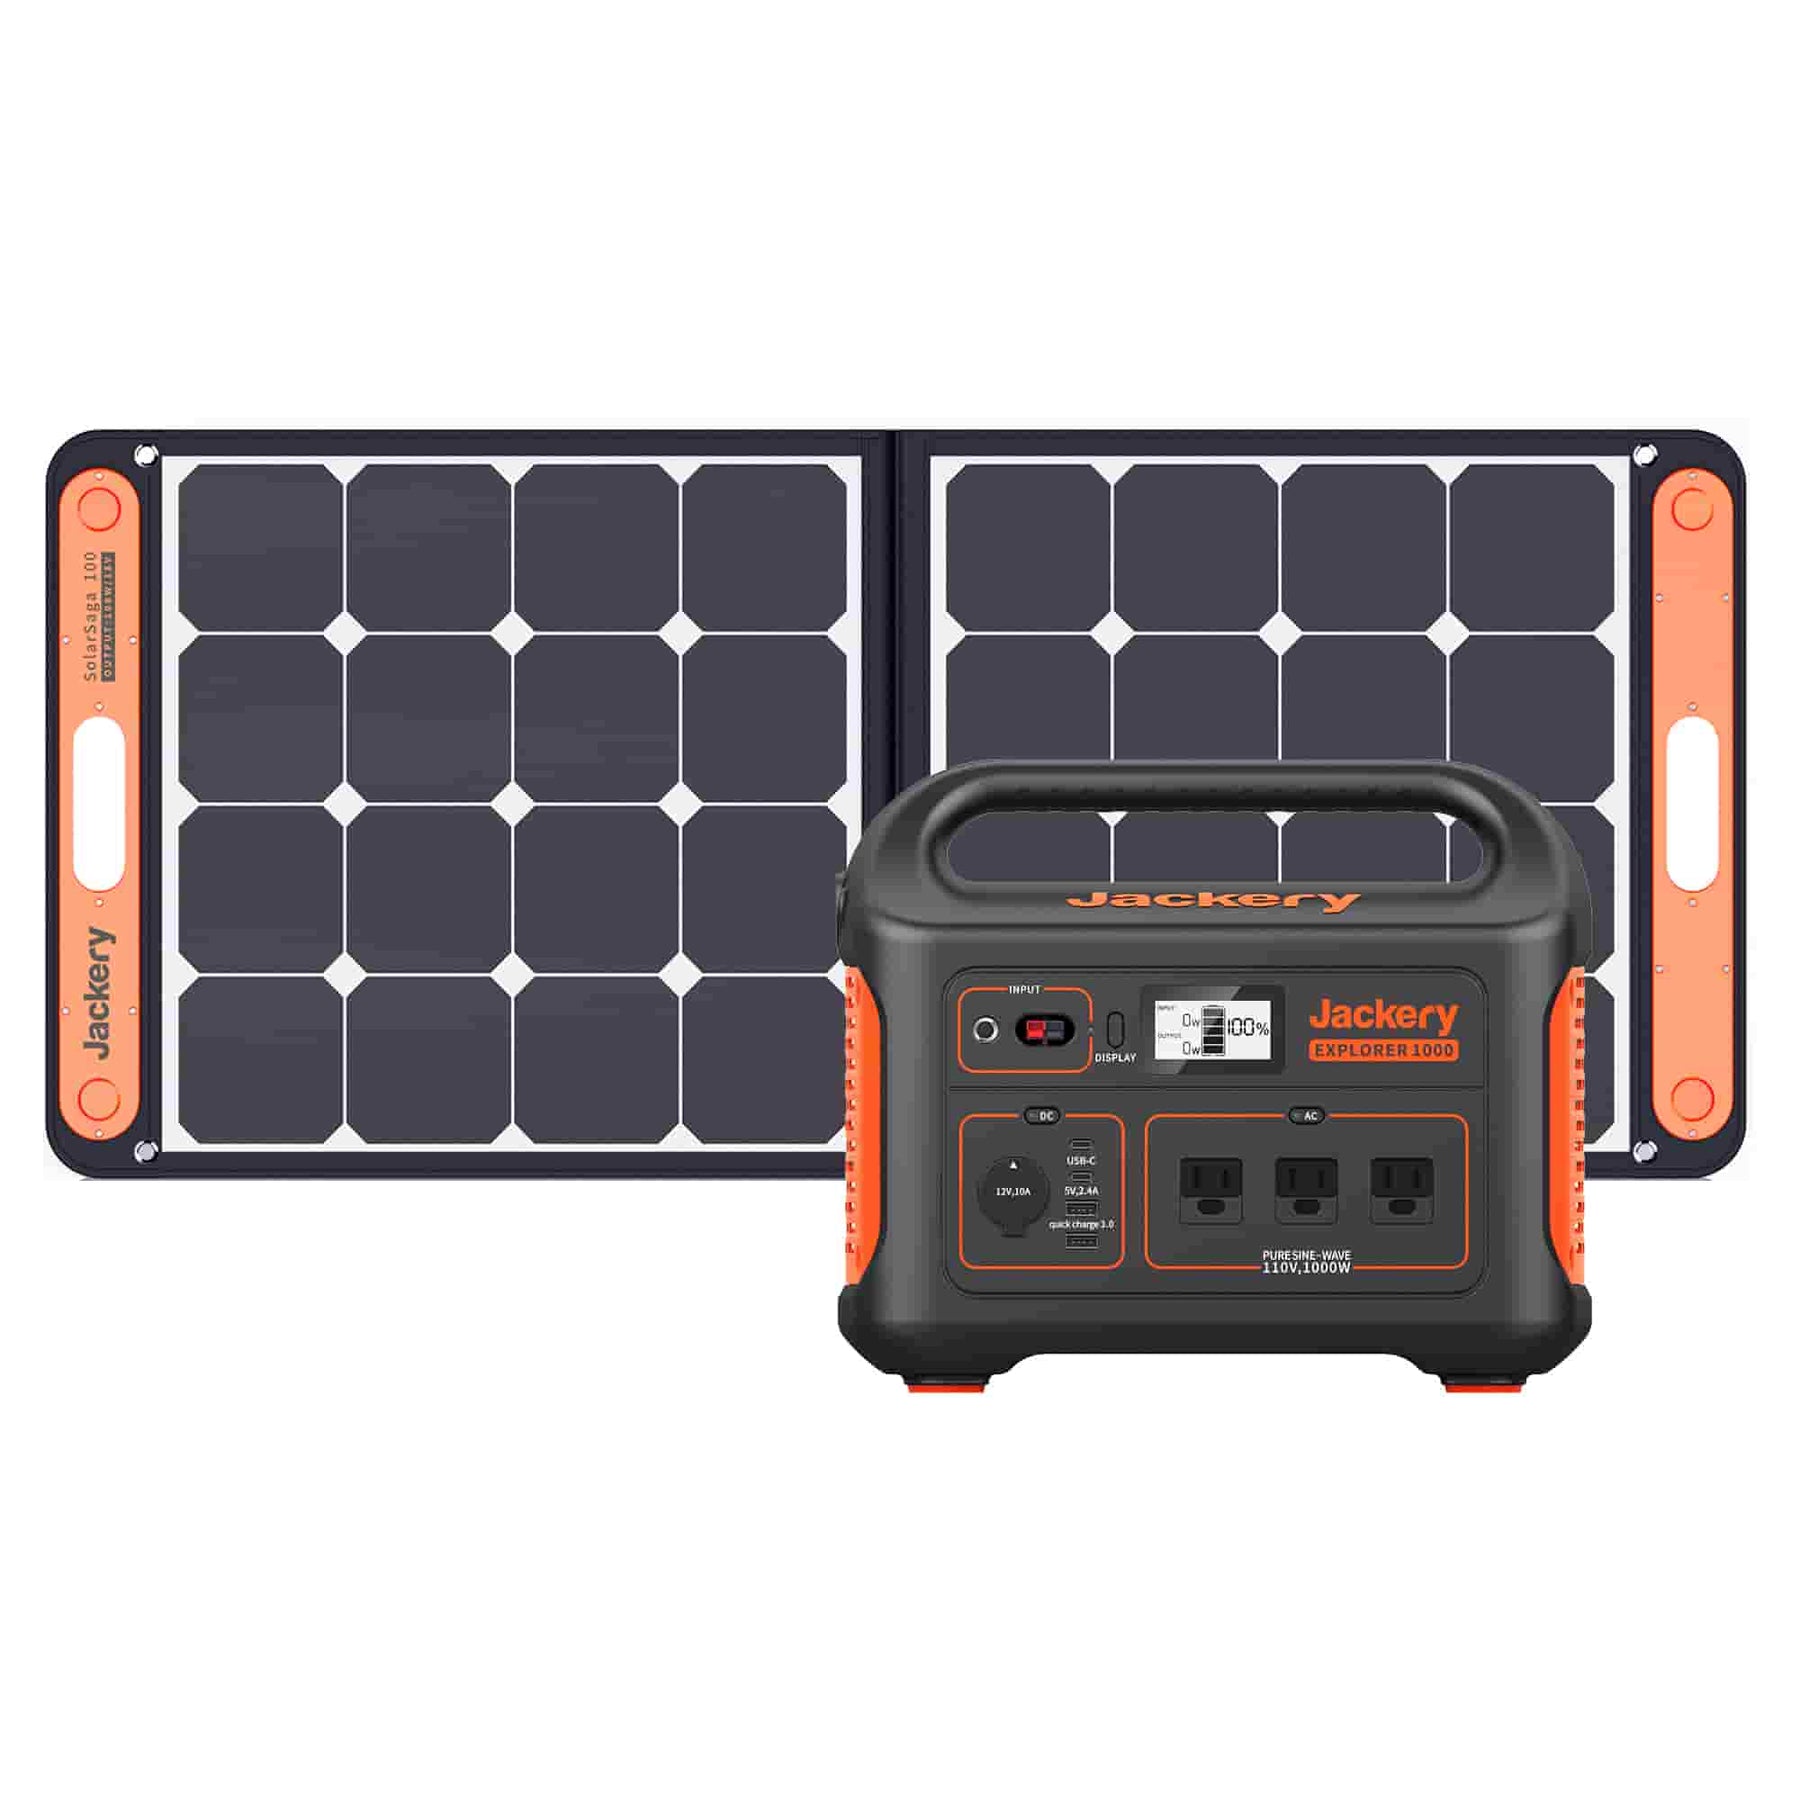 Jackery Specials Up To 30% Off For Winter Safety Jackery Solar Generator 1500 Jackery Solar Generator 1000 Jackery Solar Generator 2000 Pro Backup Power Various Combos On Sale